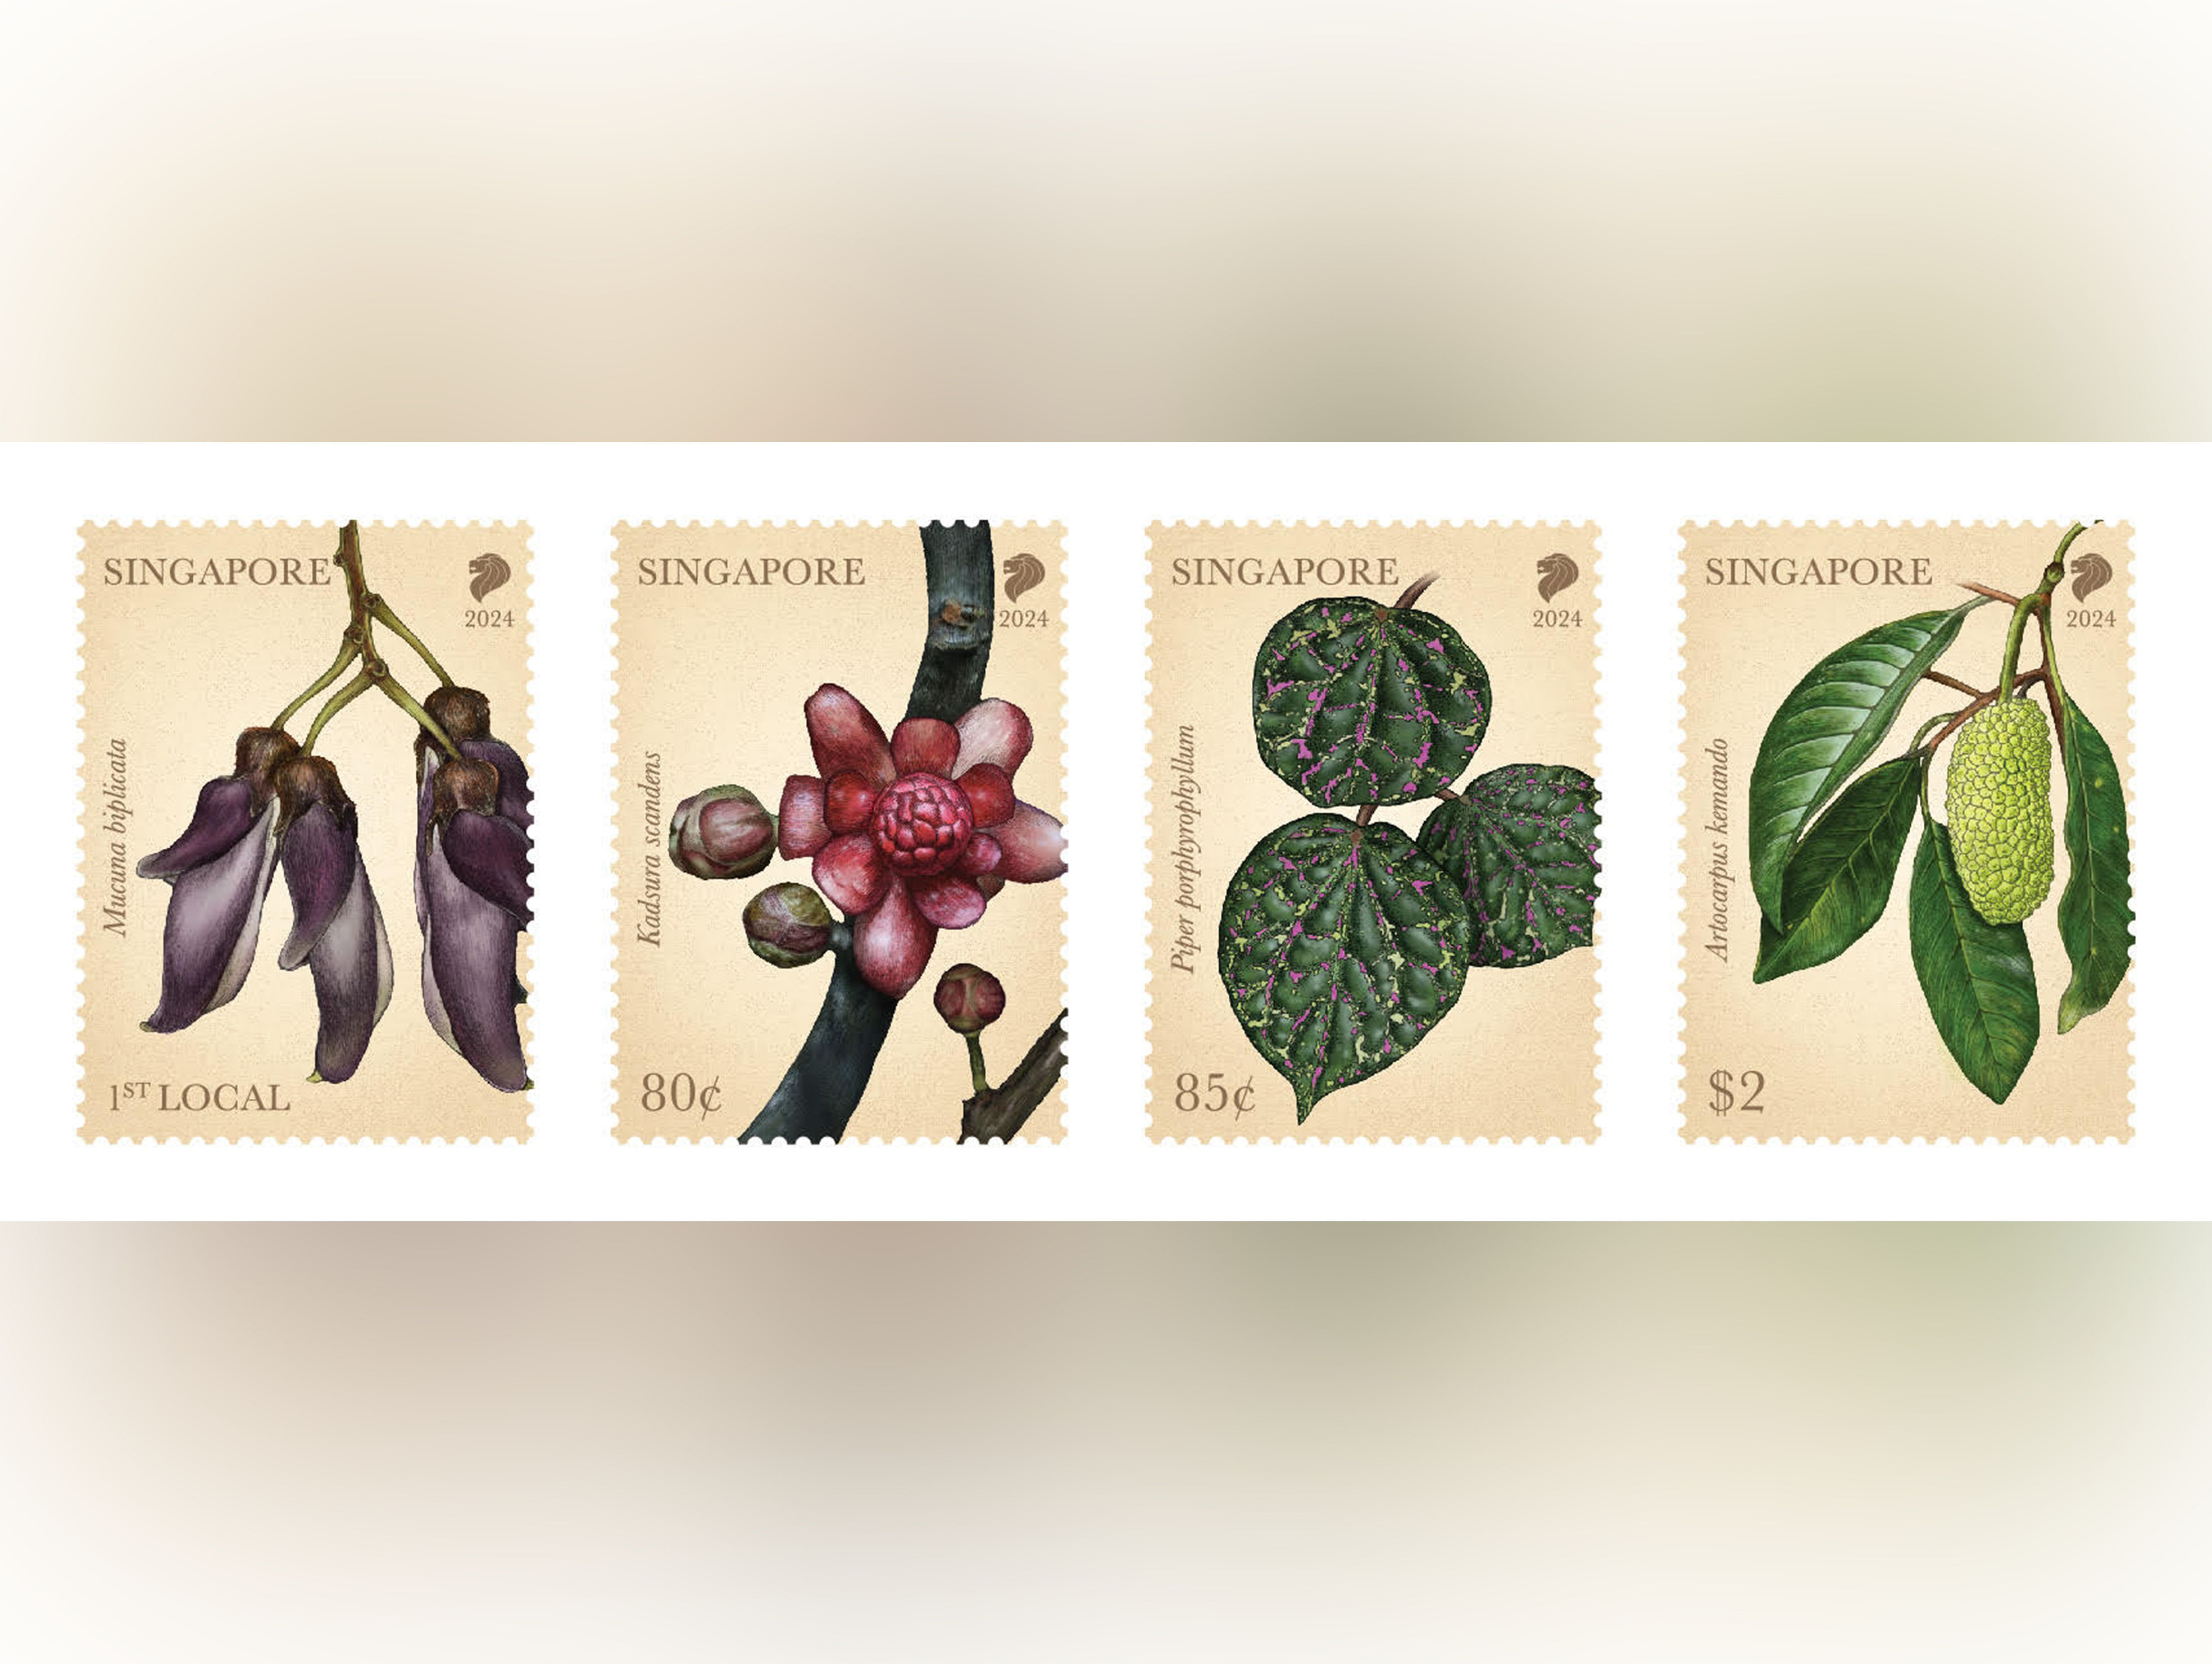 SingPost issues new stamps featuring critically endangered local flora